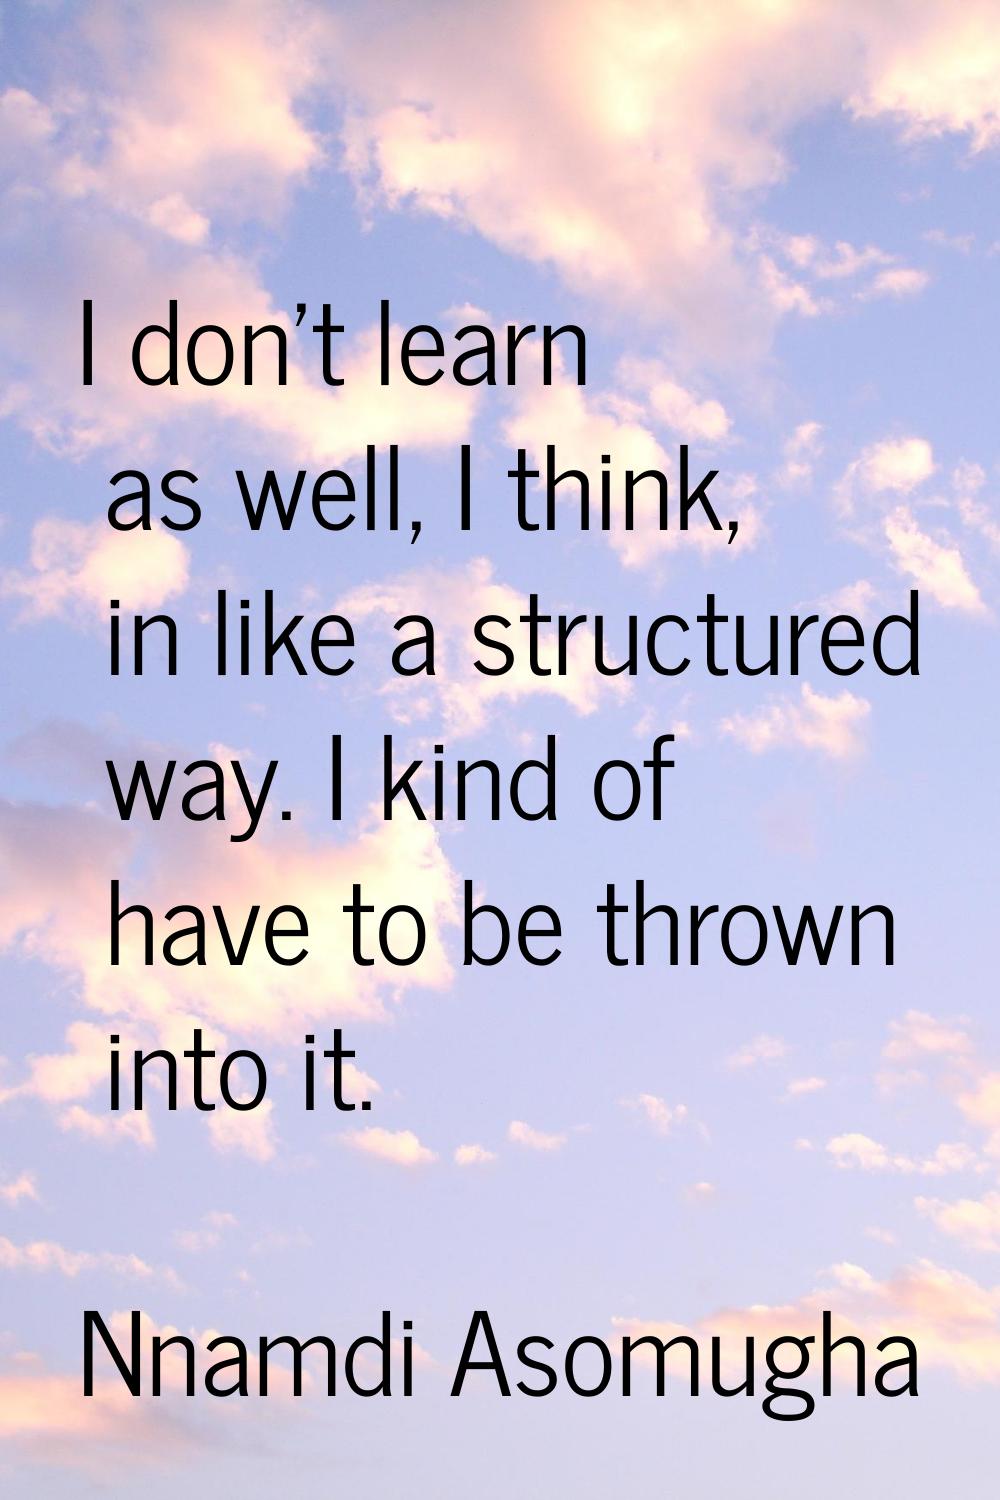 I don't learn as well, I think, in like a structured way. I kind of have to be thrown into it.